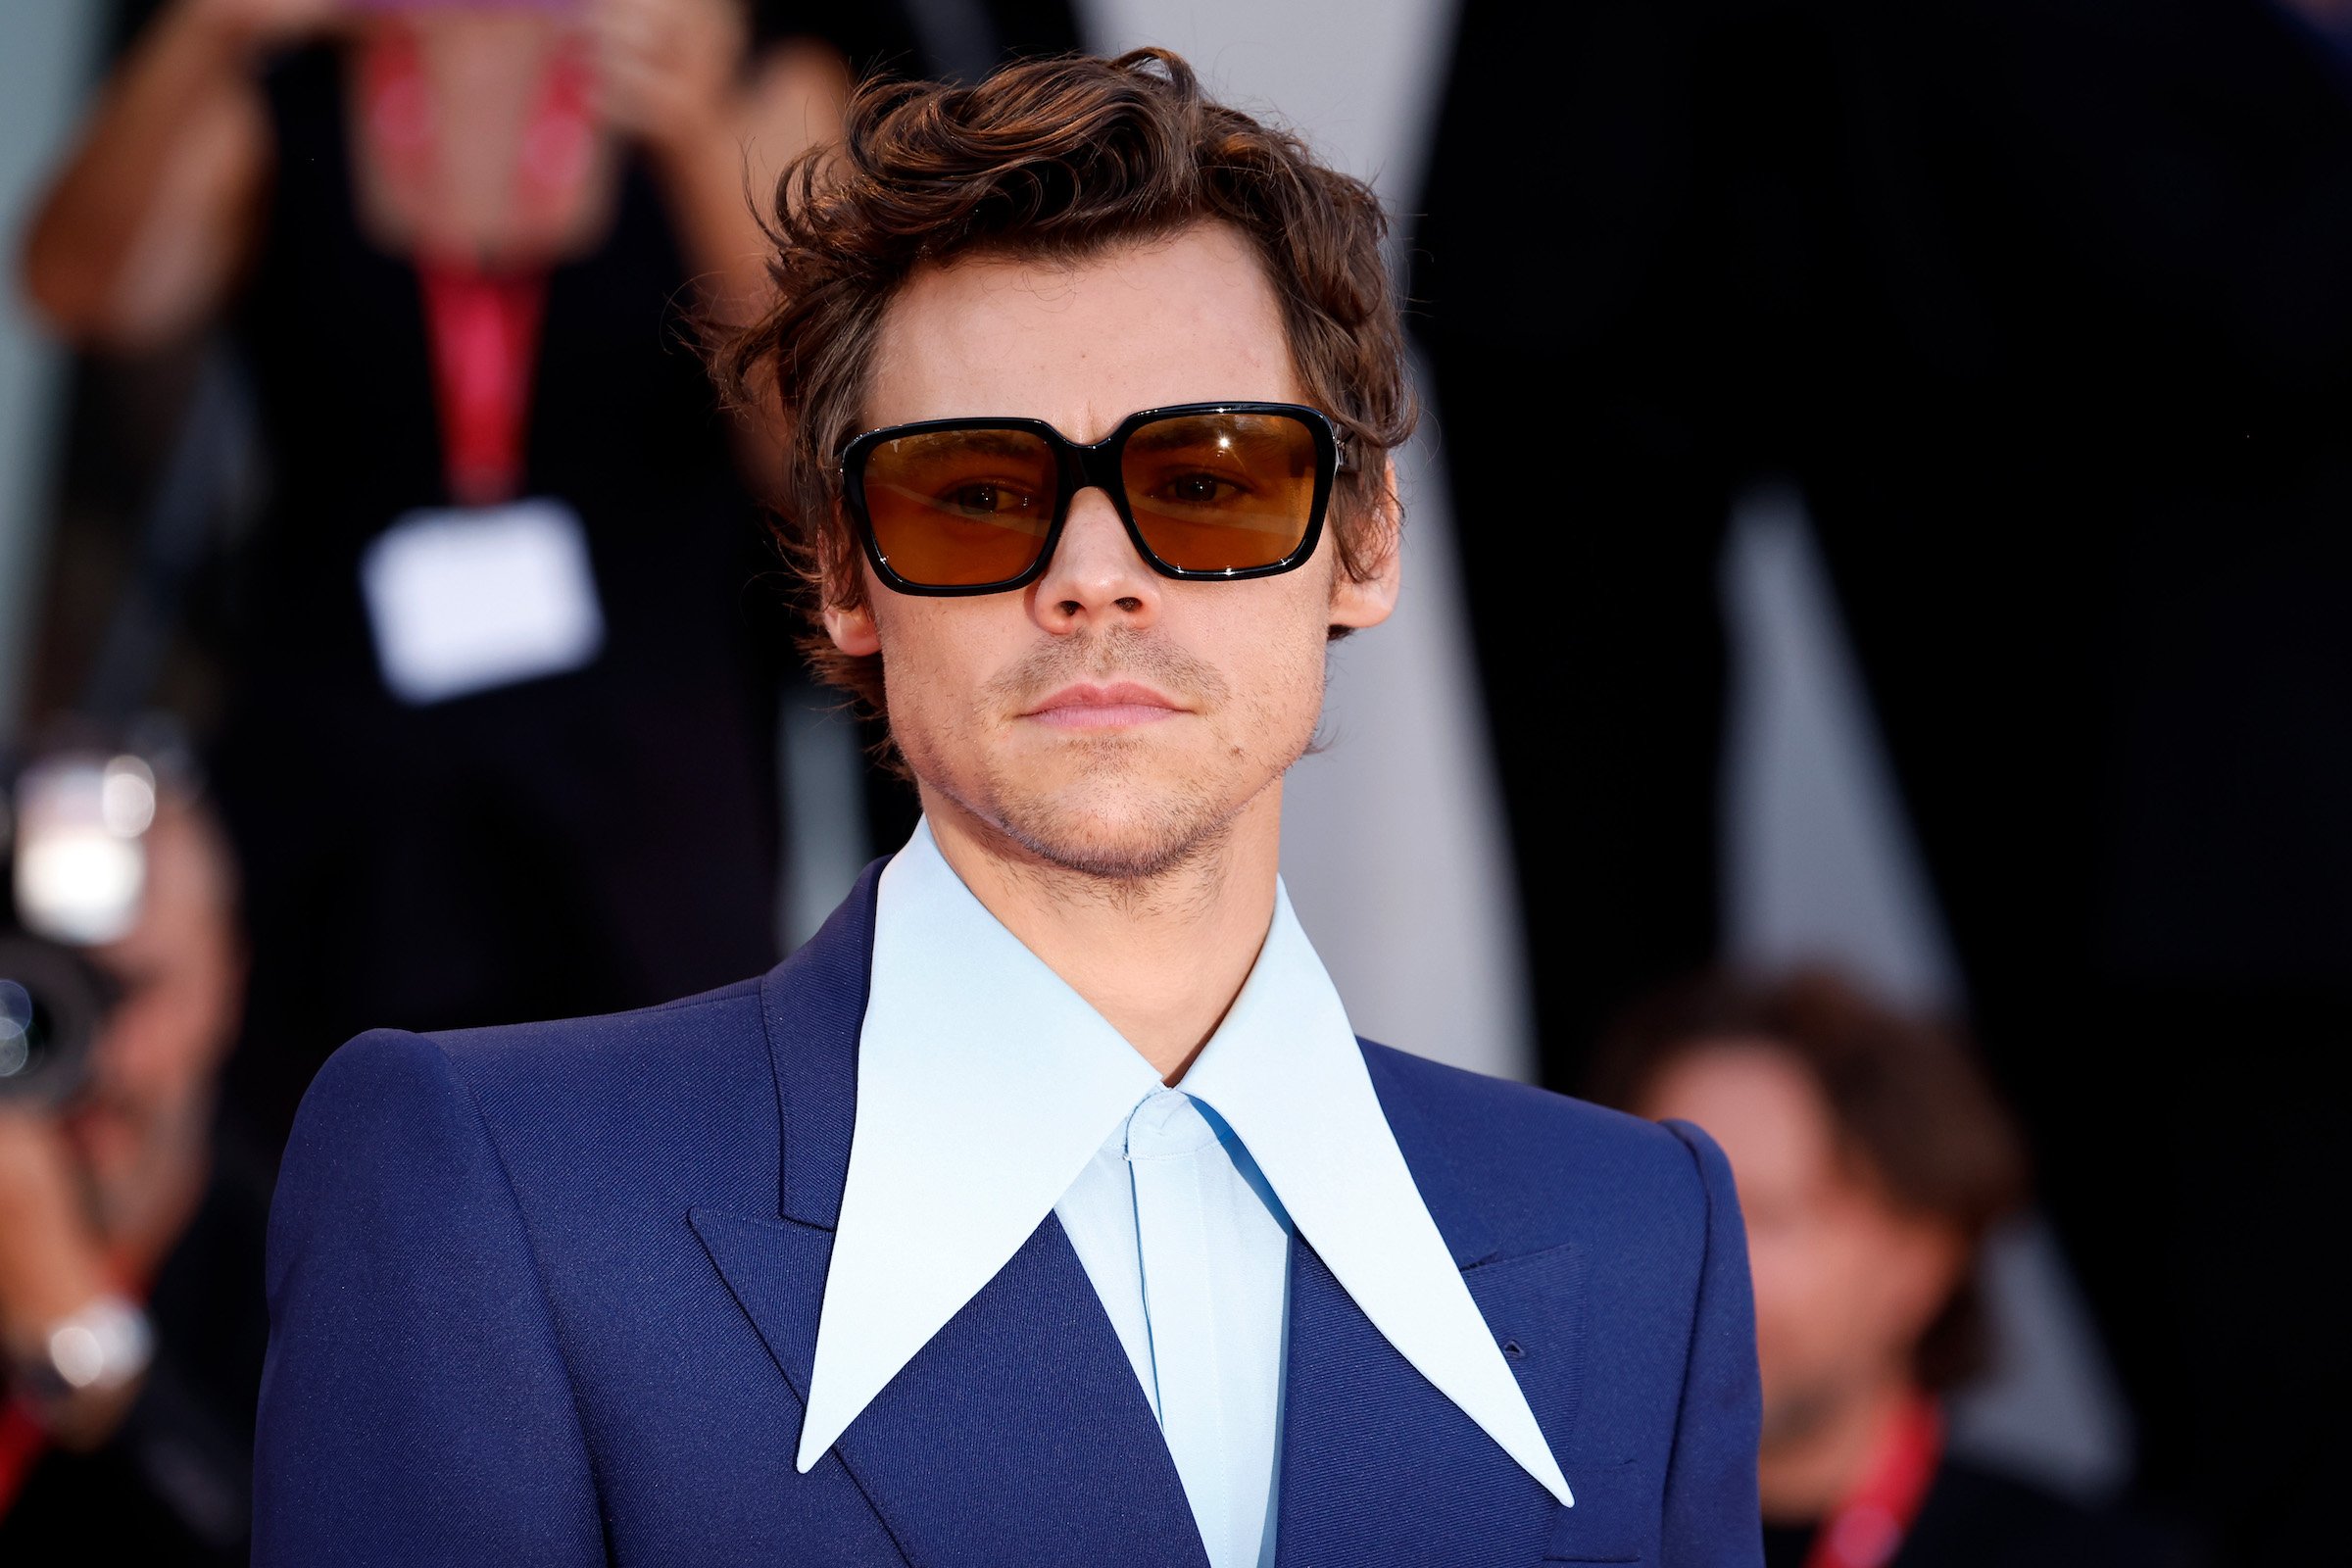 Harry Styles, who is tied with Whitney Houston and Mariah Carey for a Billboard Hot 100 chart record, wearing a blue suit with turquoise collar.